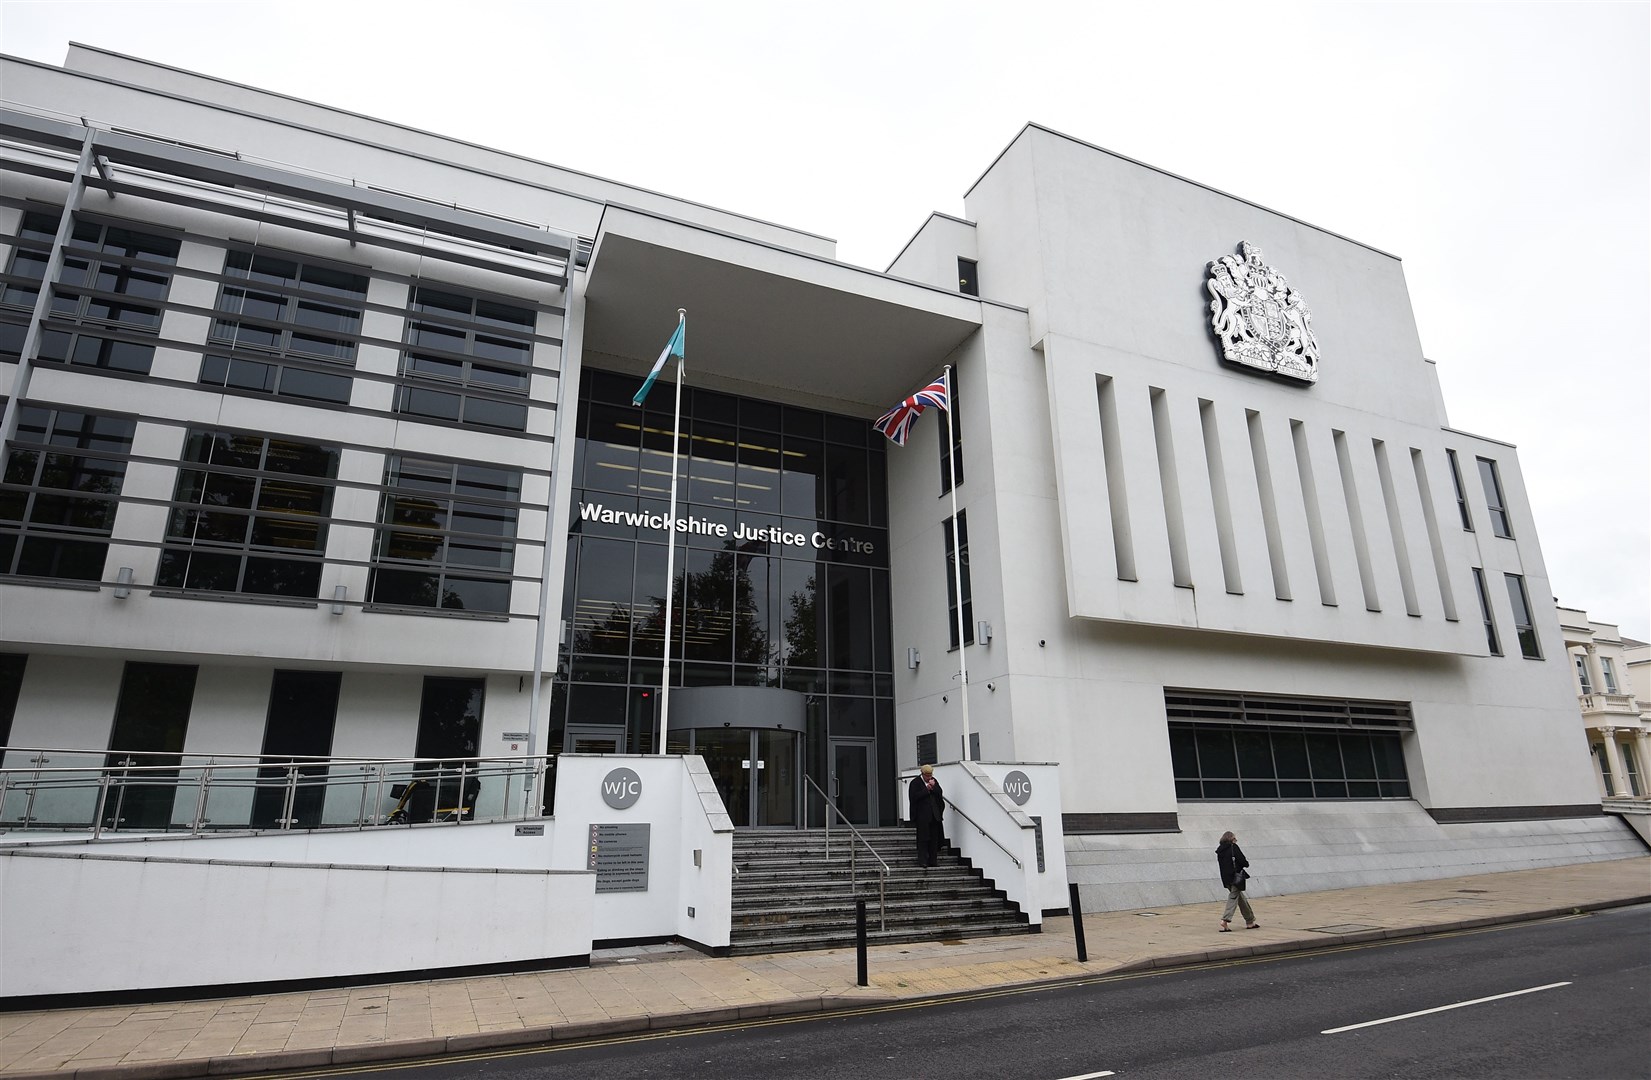 General view of the Warwickshire Justice Centre in Leamington Spa. (Andrew Matthews/PA)